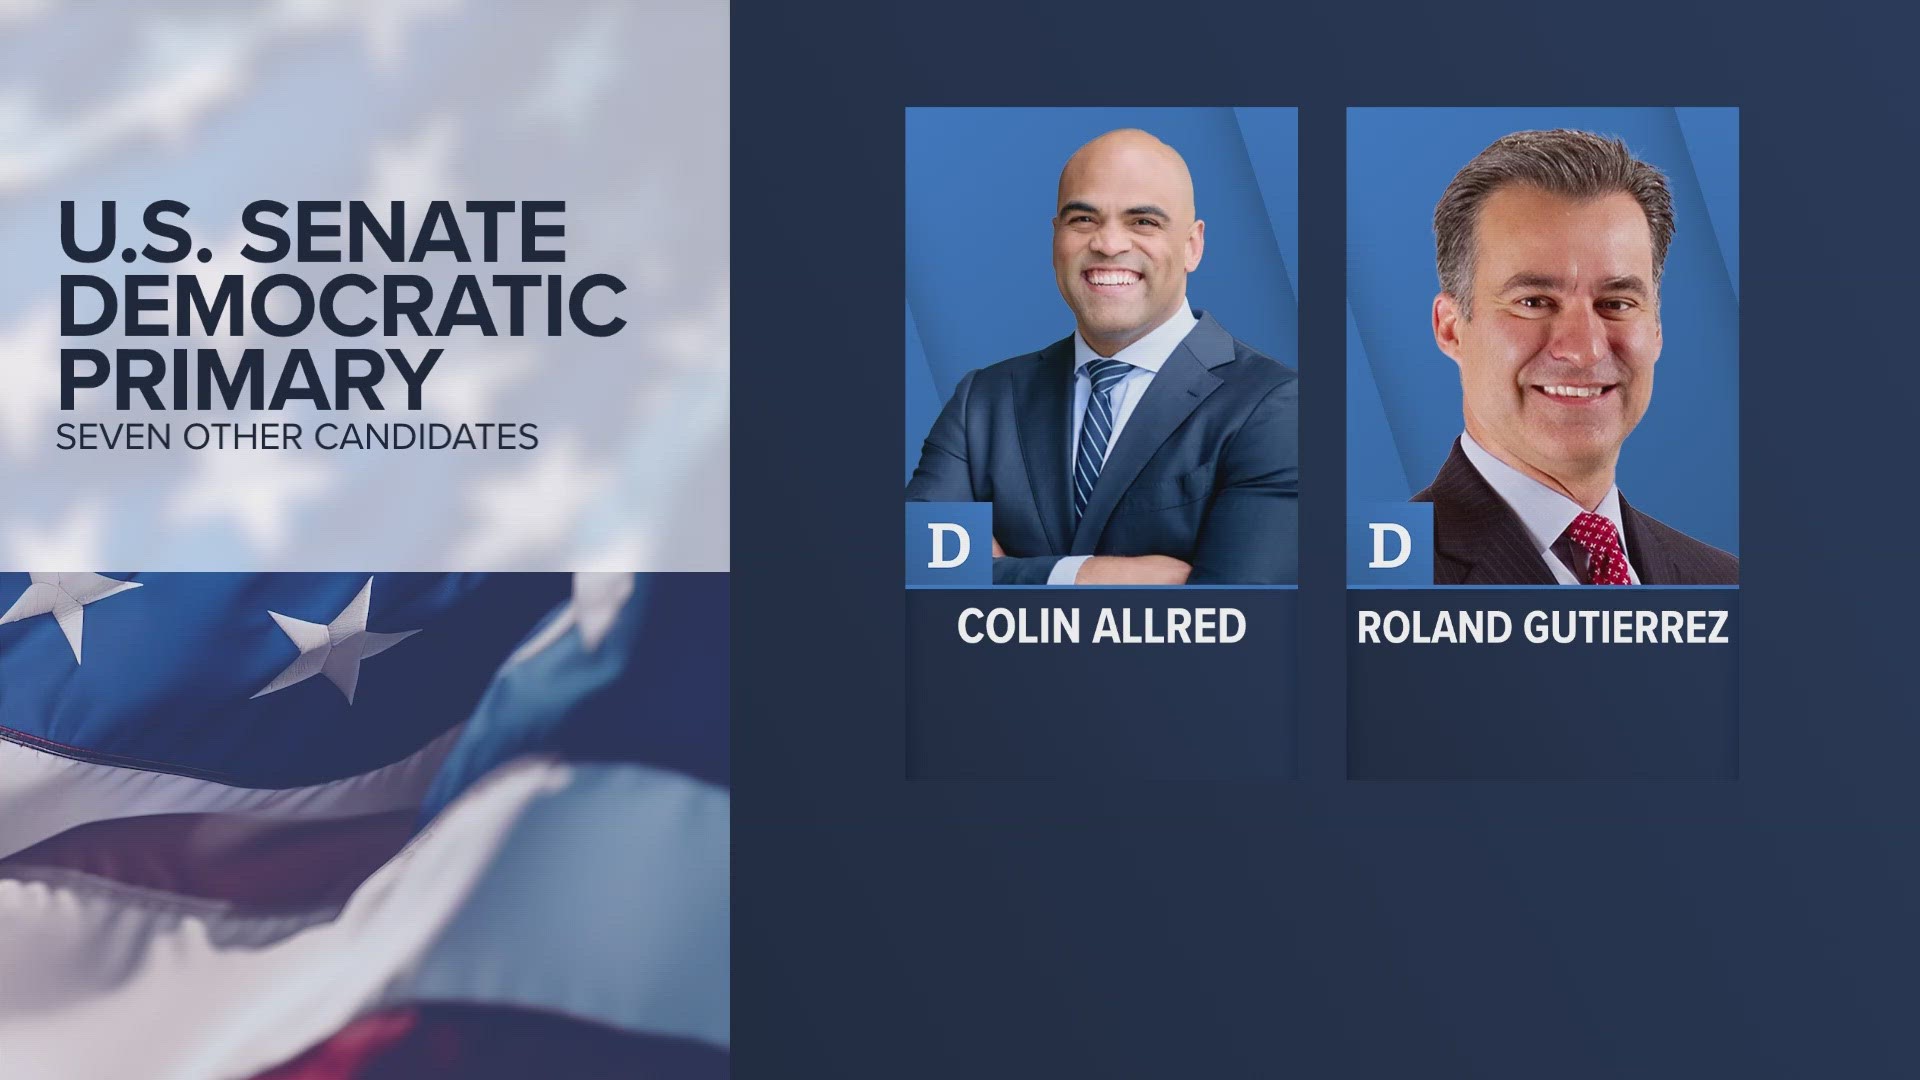 Statewide, the biggest race on the ballot is the Democratic race for U.S. Senate. Congressman Colin Allred and State Sen. Roland Gutierrez headline a crowded field.